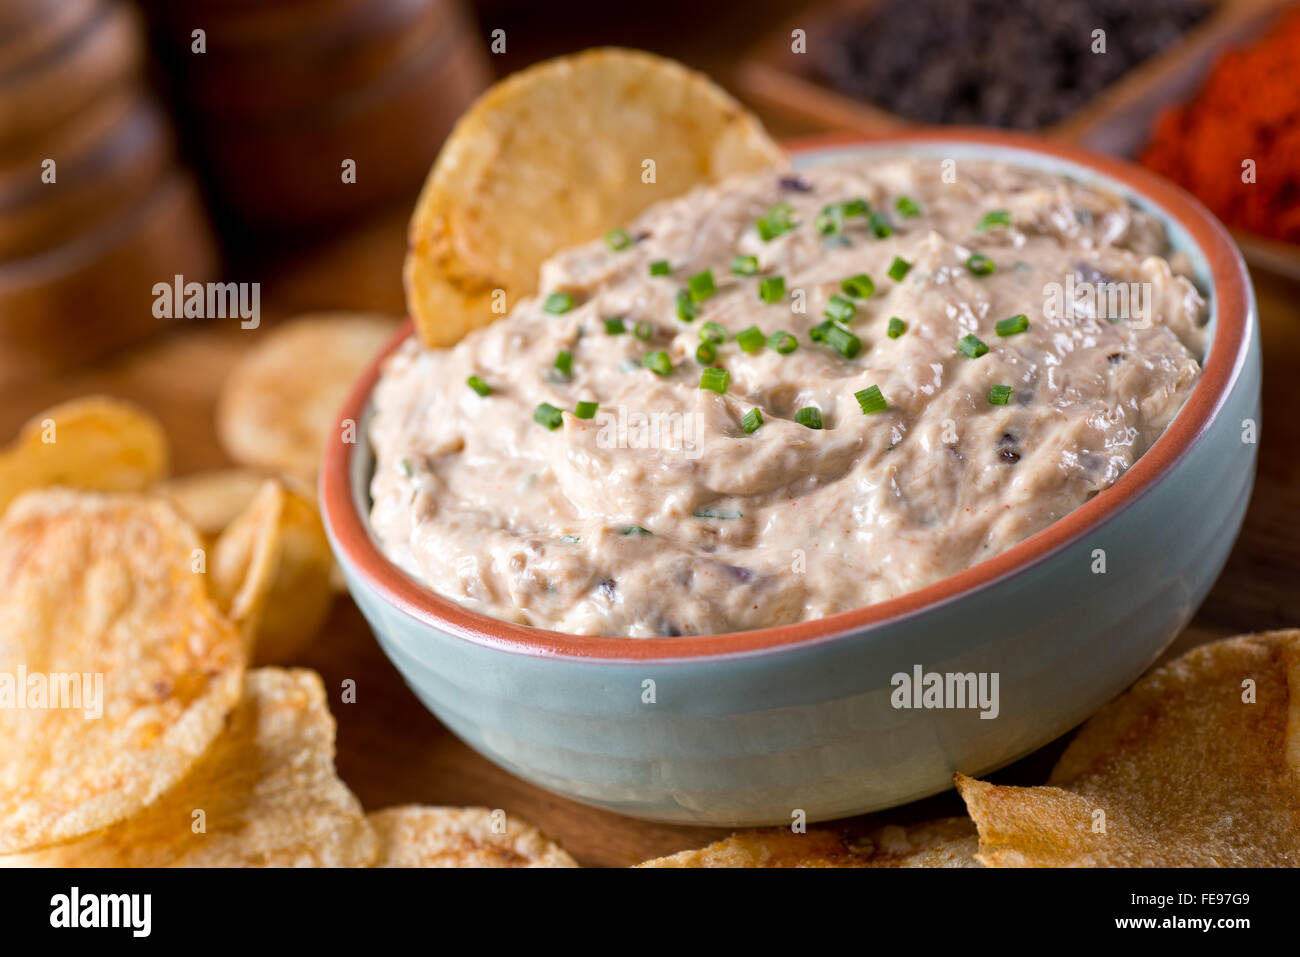 A bowl of delicious homemade smoked mackerel dip with caramelized onions and smoked paprika. Stock Photo